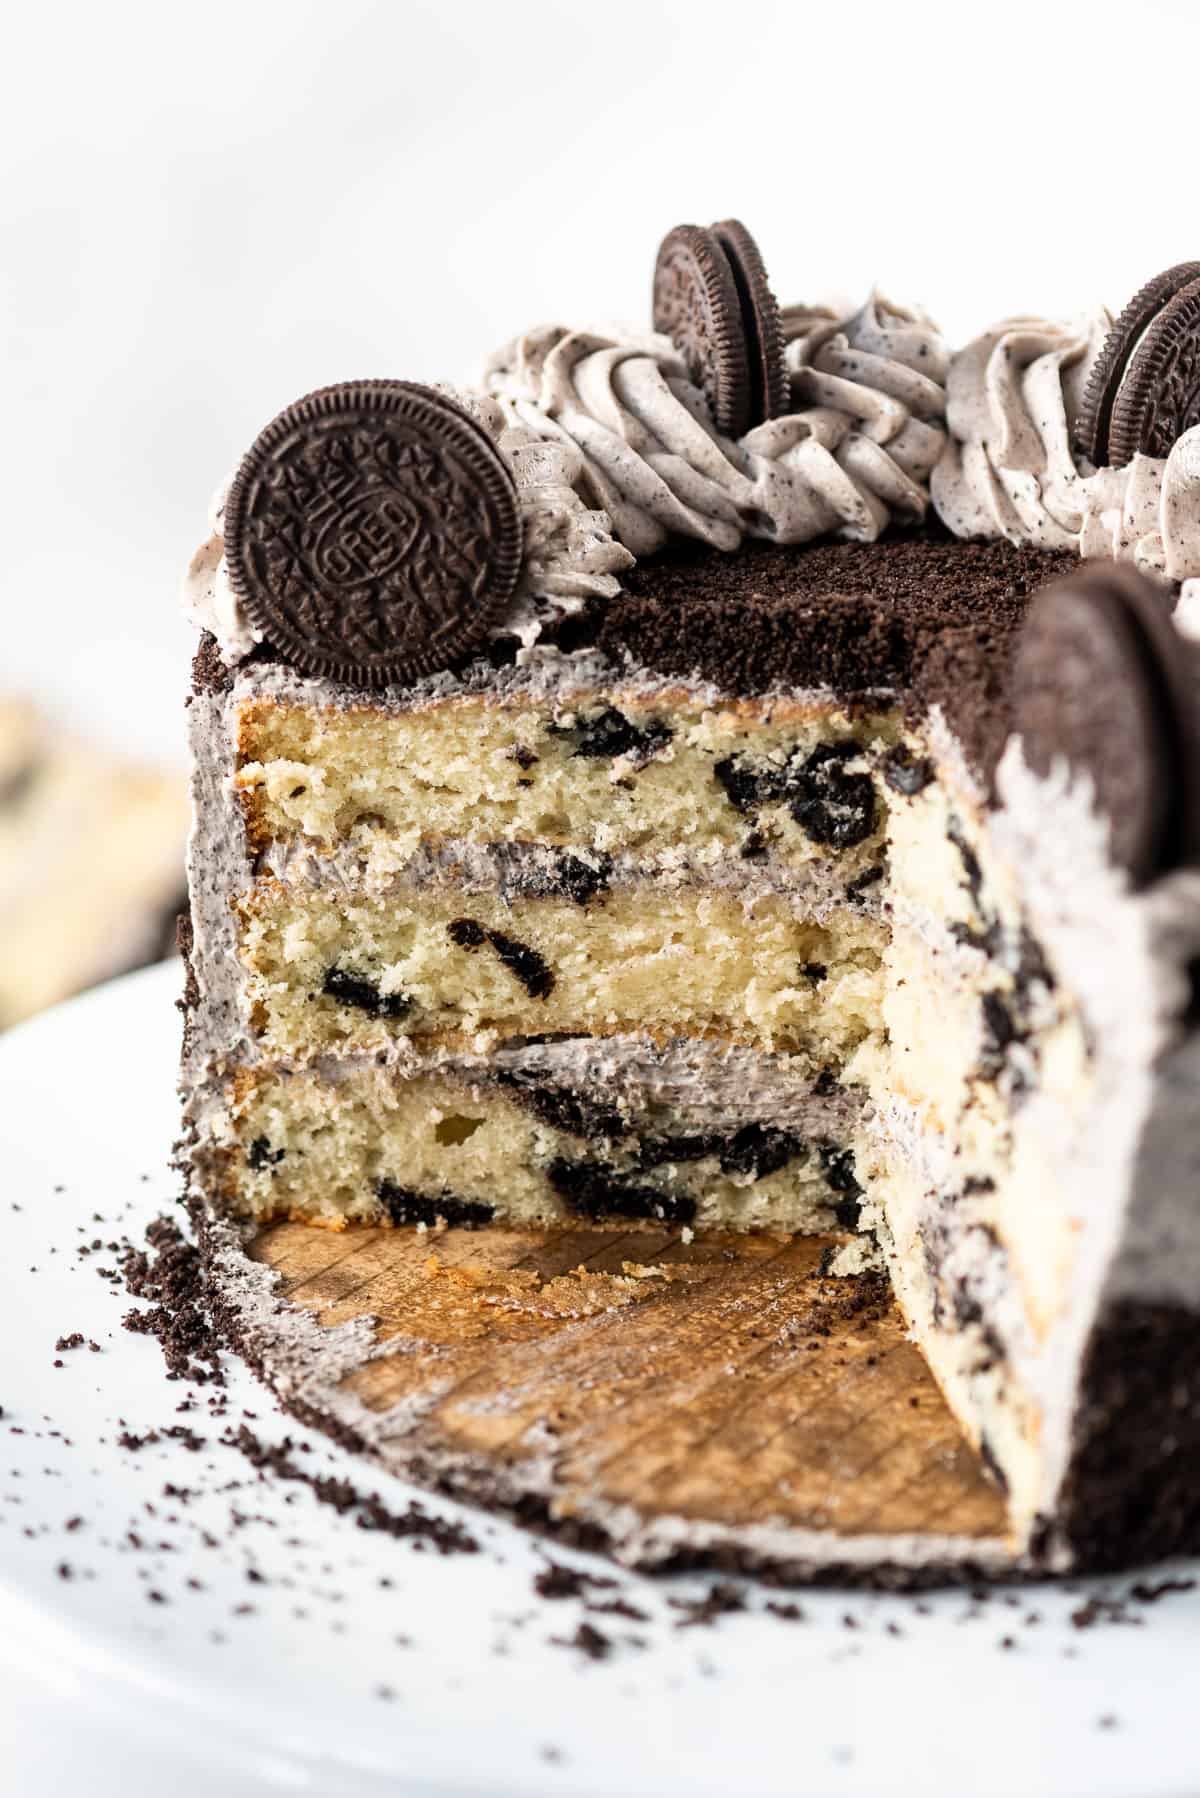 A cross-section image of layers of homemade white cake with Oreo pieces baked into them.